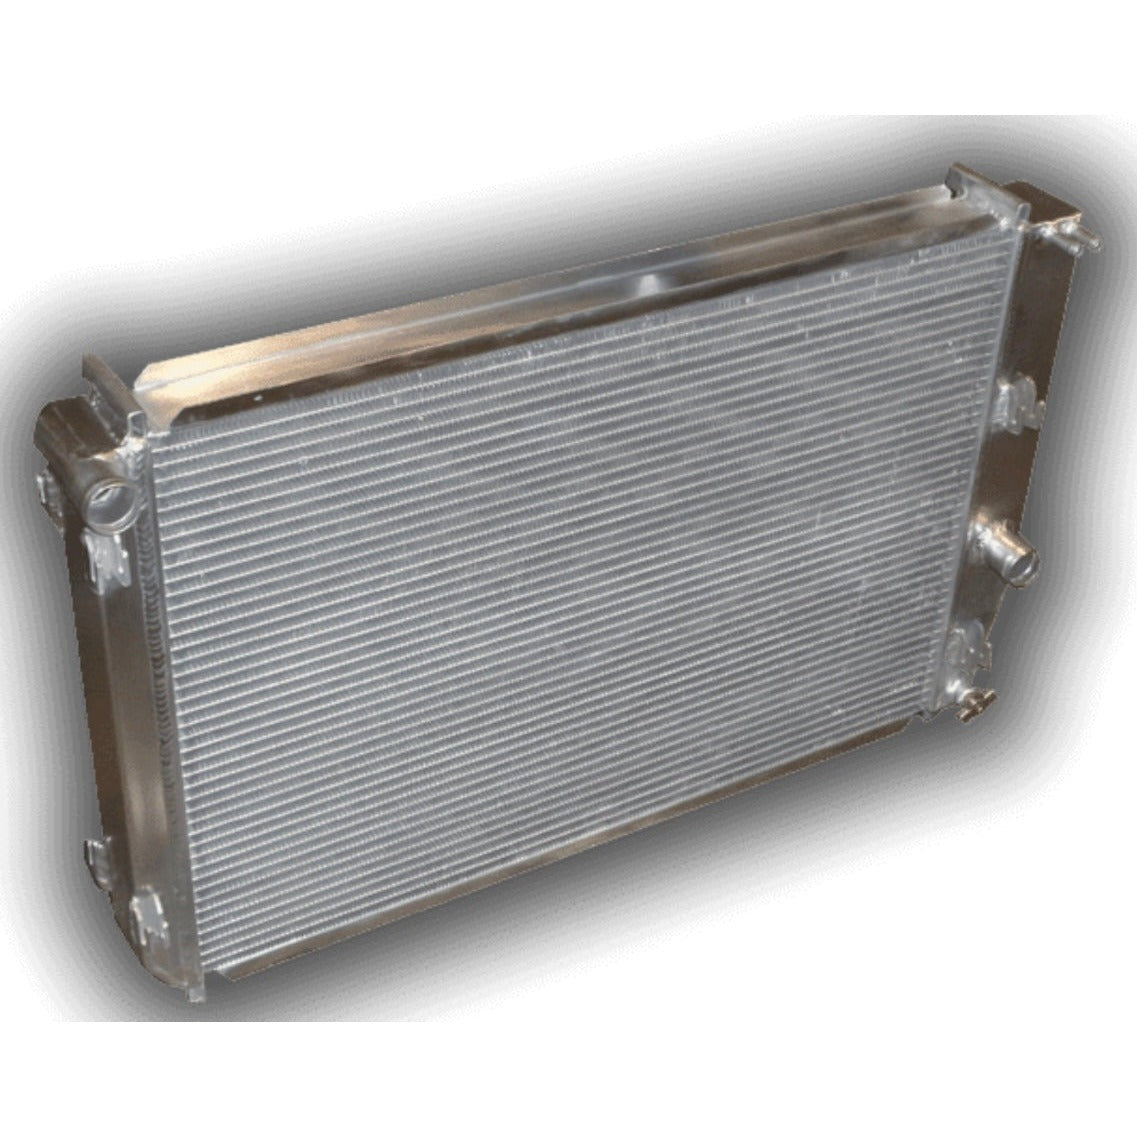 ECP 2001 - 2004 Corvette C5 Aluminum Radiator - Quick Disconnect Automatic Transmission - Engineered Cooling Products ECP